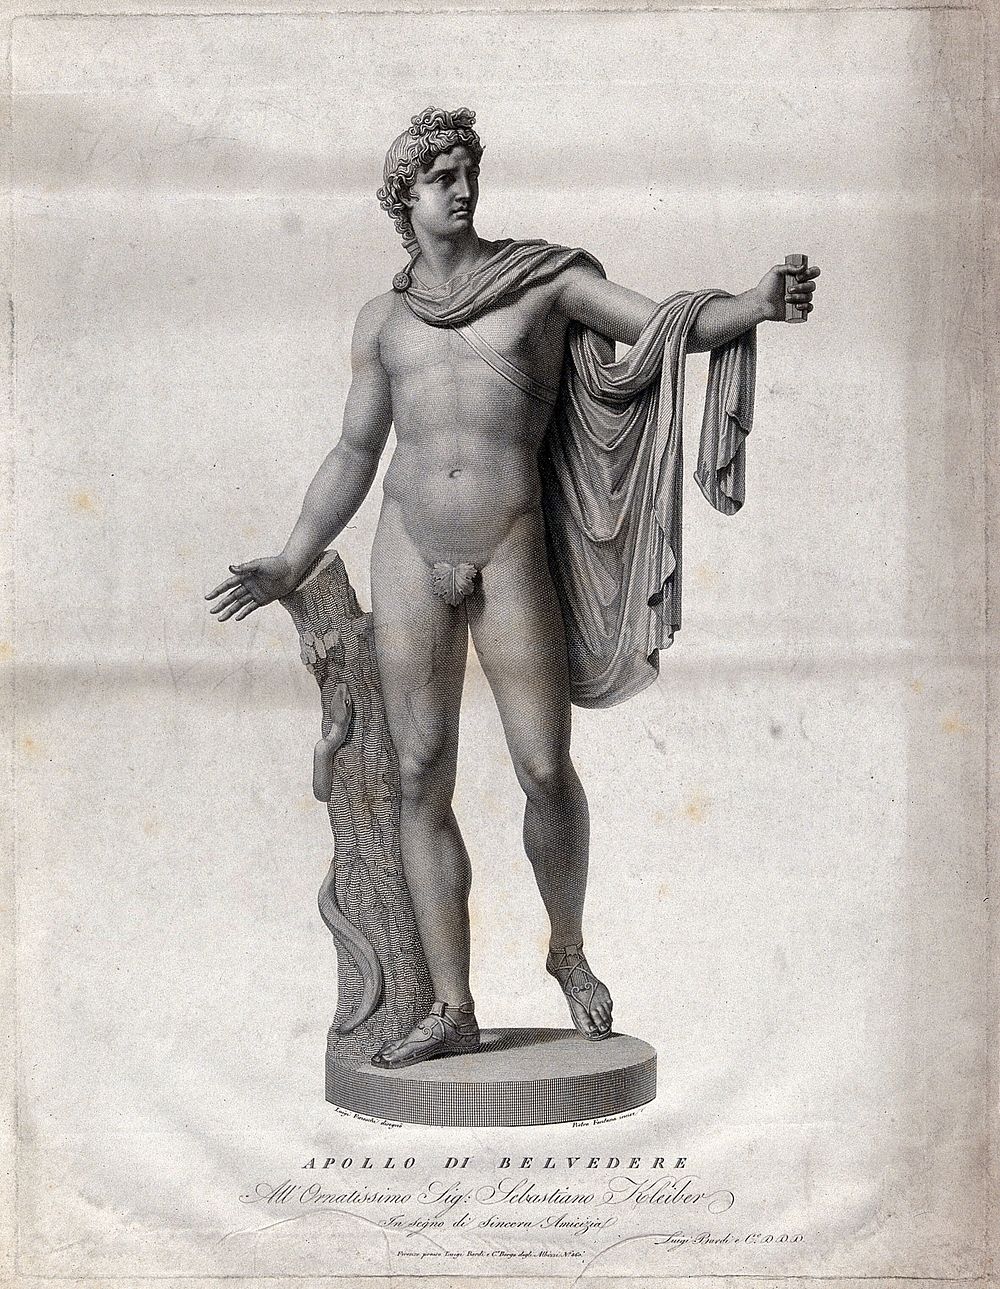 Apollo. Engraving by P. Fontana after L. Fineschi.